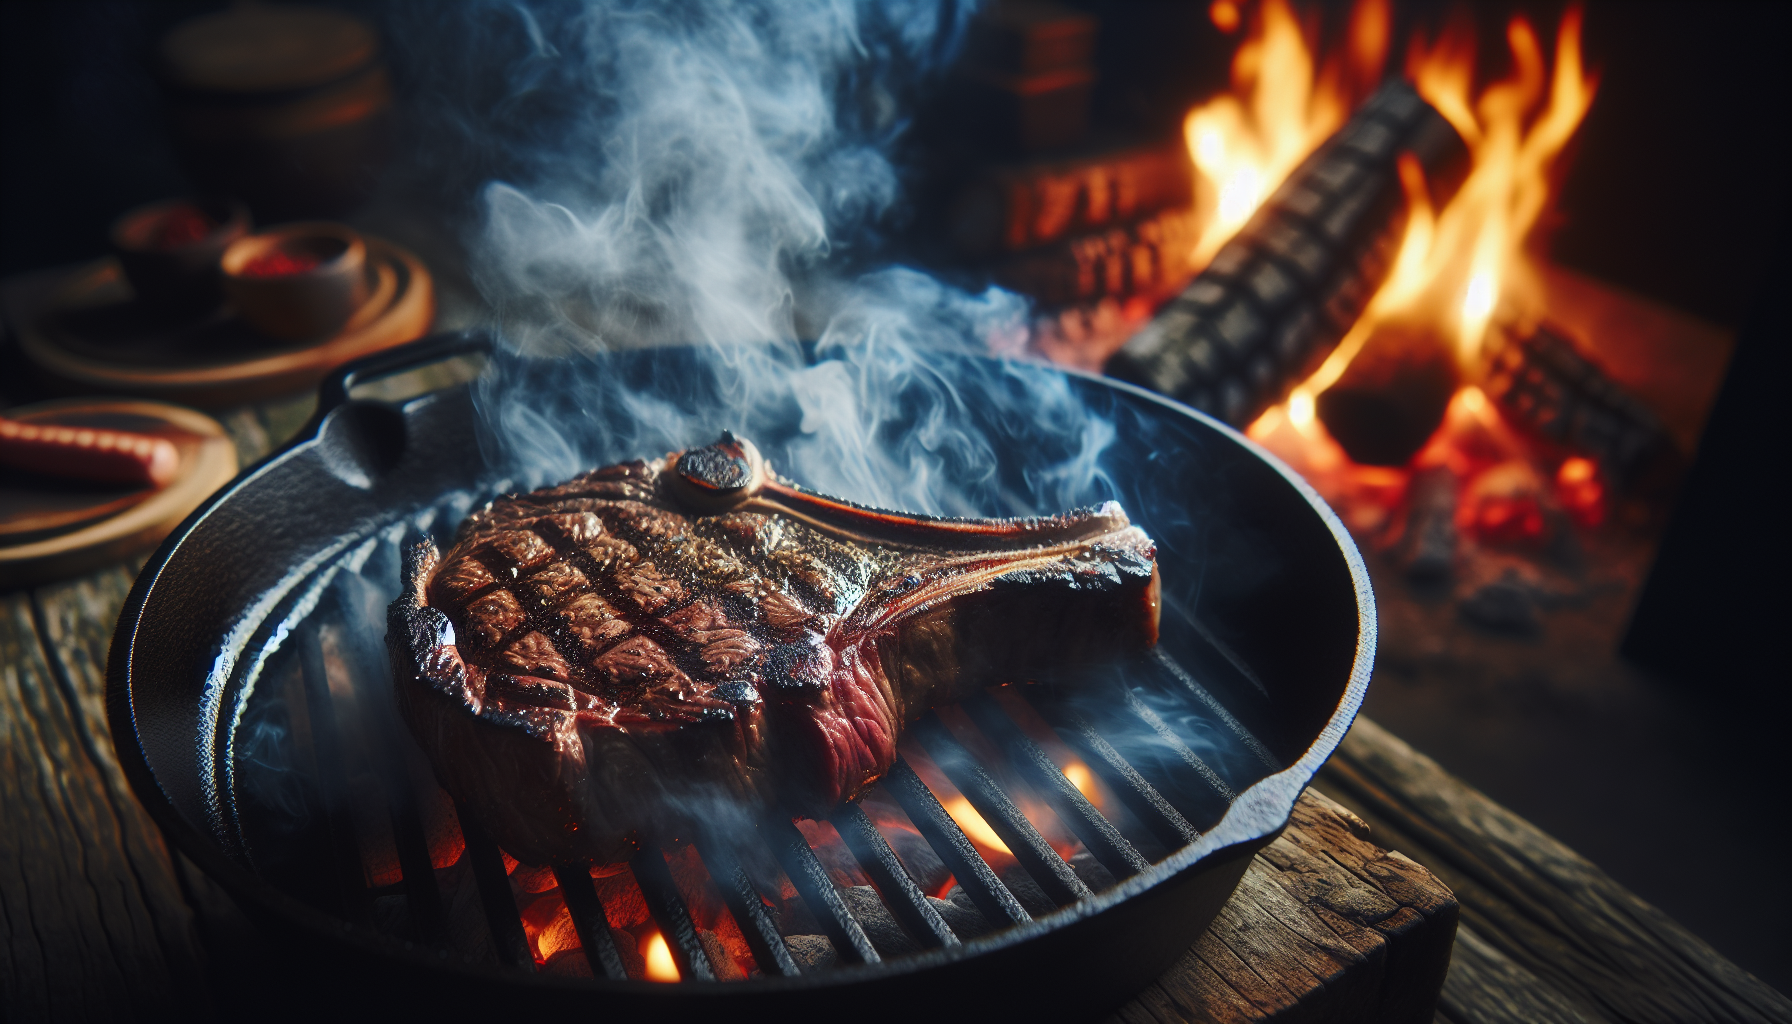 A sizzling steak on a grill with smoke rising